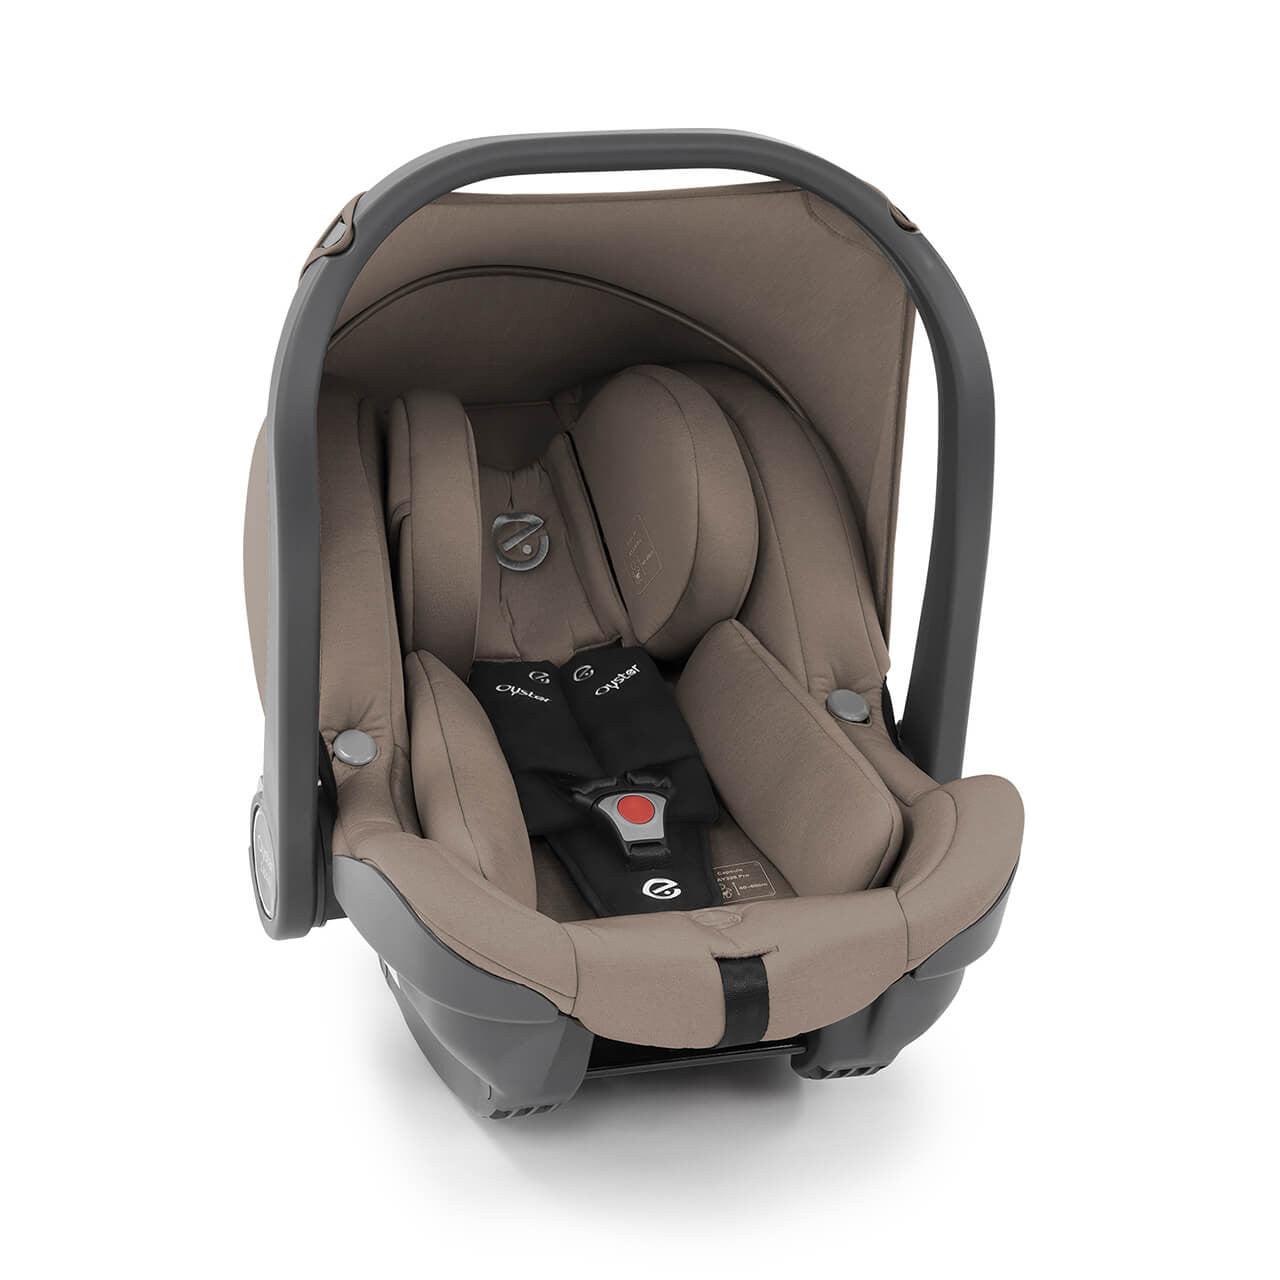 Babystyle Oyster Capsule Group 0+ Infant i-Size Car Seat - Mink - For Your Little One